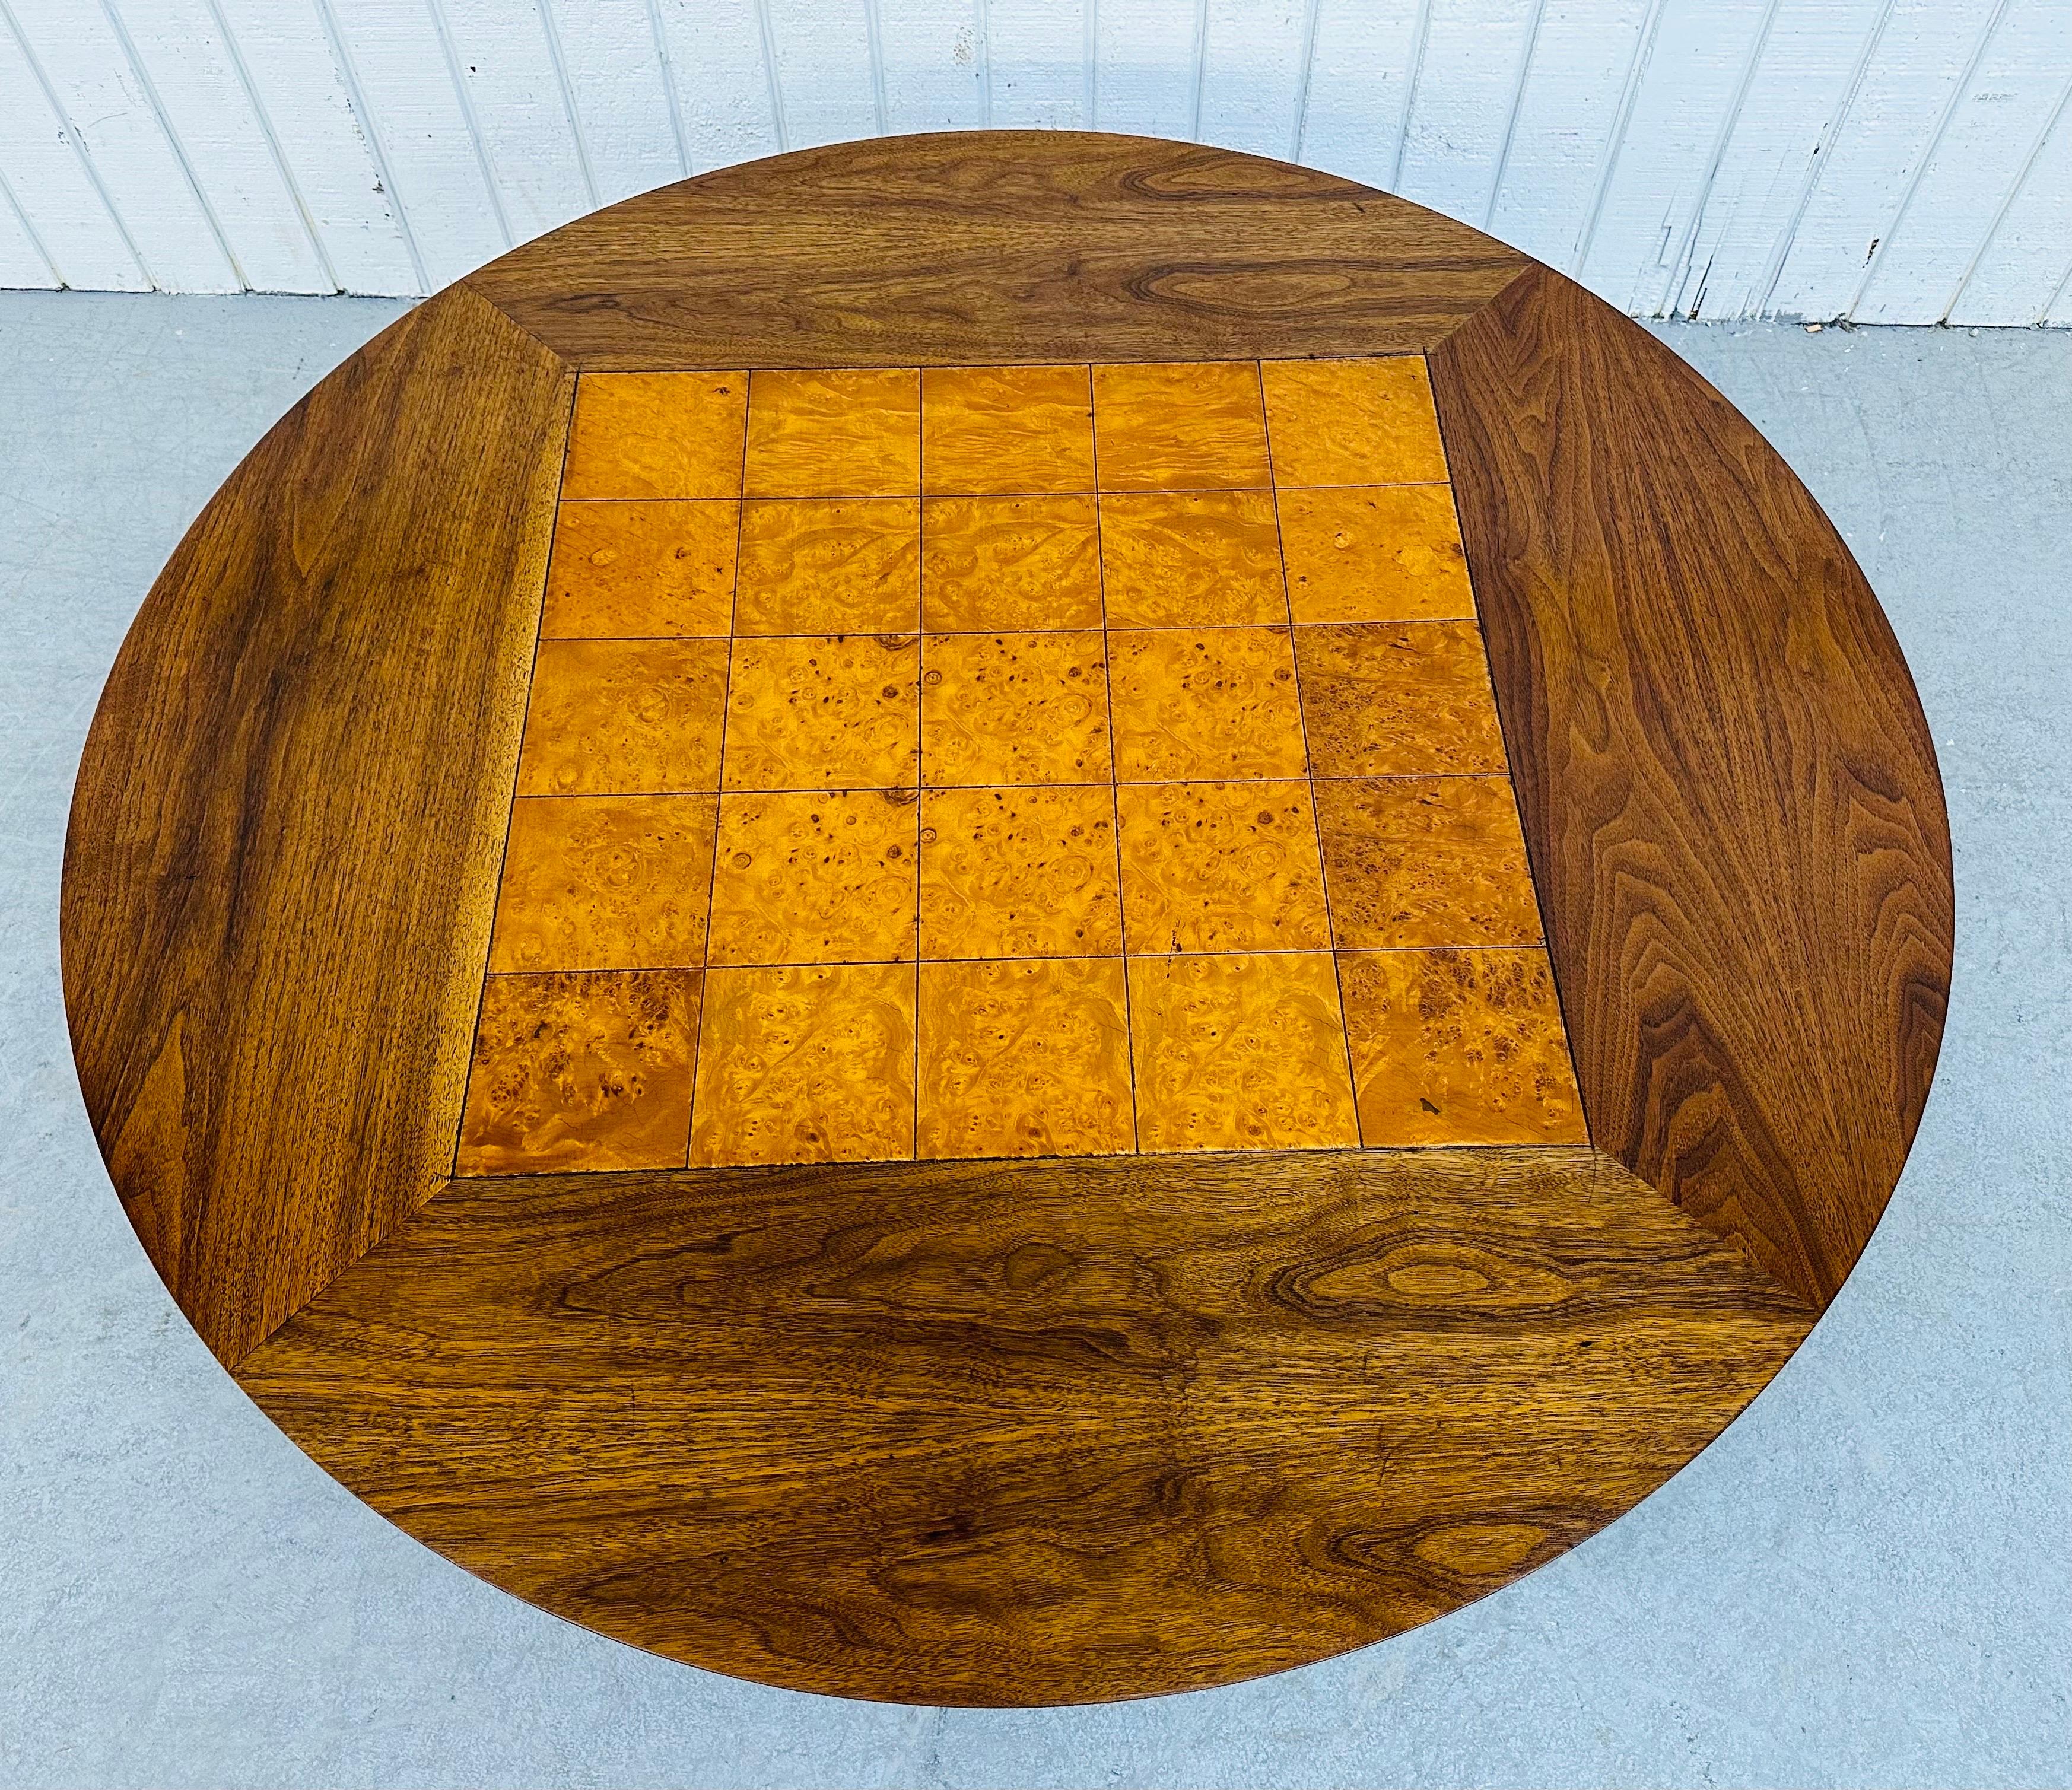 This listing is for a Mid-Century Modern Lane Round Burled Walnut Coffee Table. Featuring a beautiful round two-tone walnut top, square burled center, and a black lacquered base. This is an exceptional combination of quality and modern design by